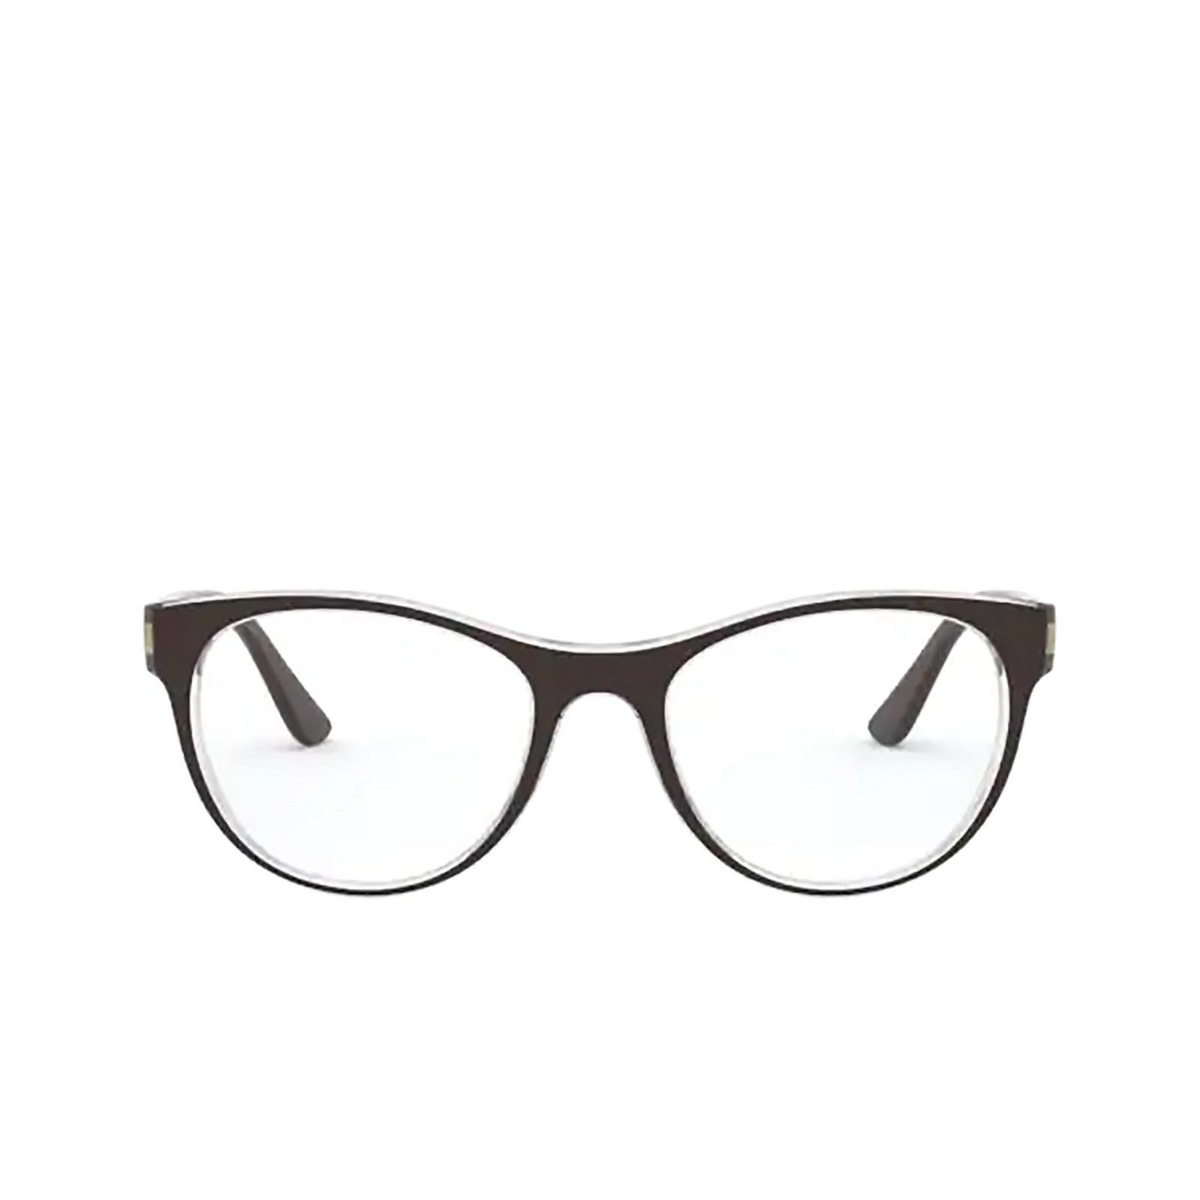 Vogue VO5336 Eyeglasses 2842 TOP BROWN / SERIGRAPHY - front view